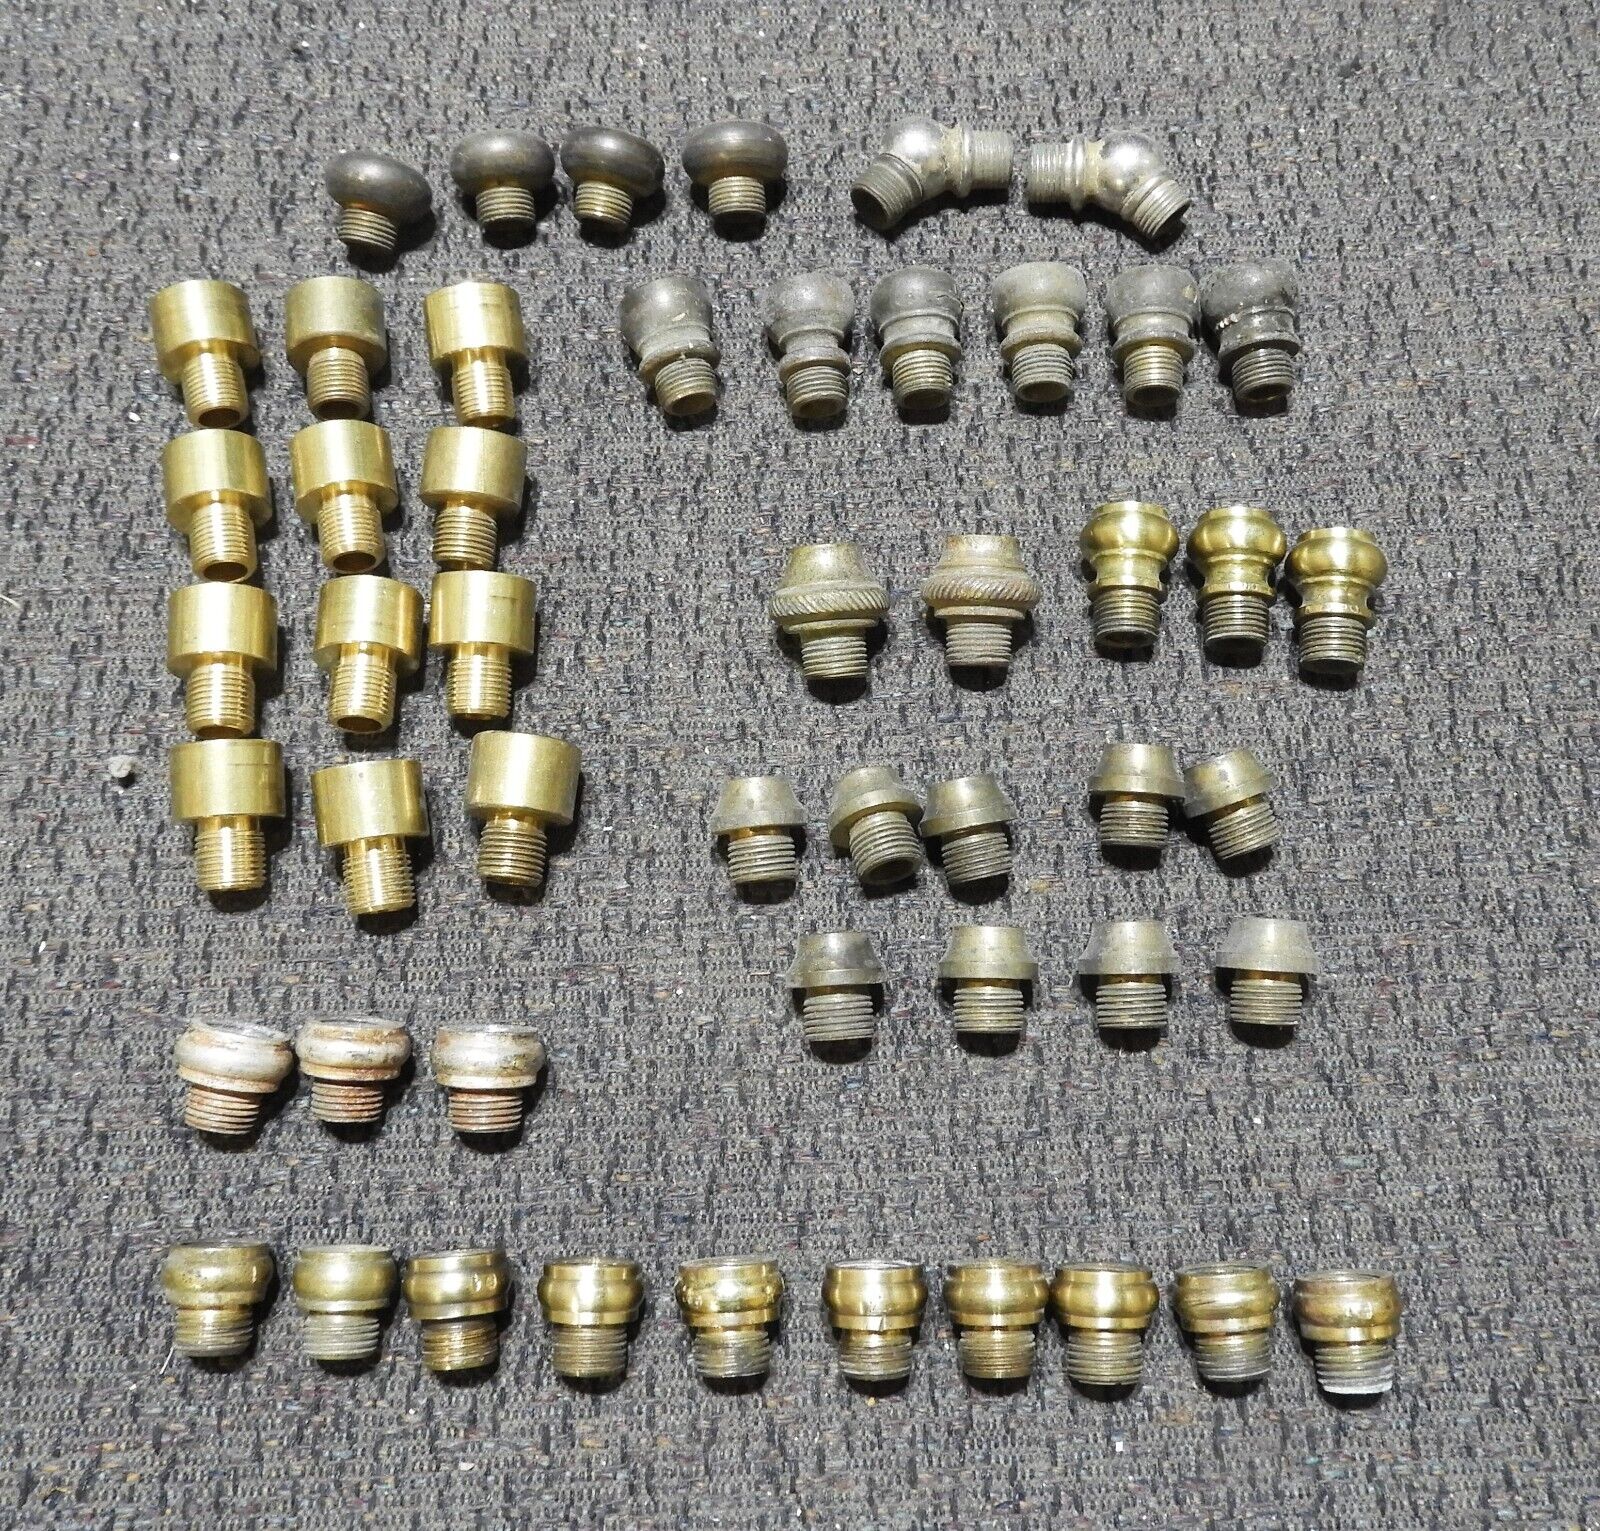 APPROX. 50 BRASS NOZZLES FOR FIXTURE ARMS, #2568